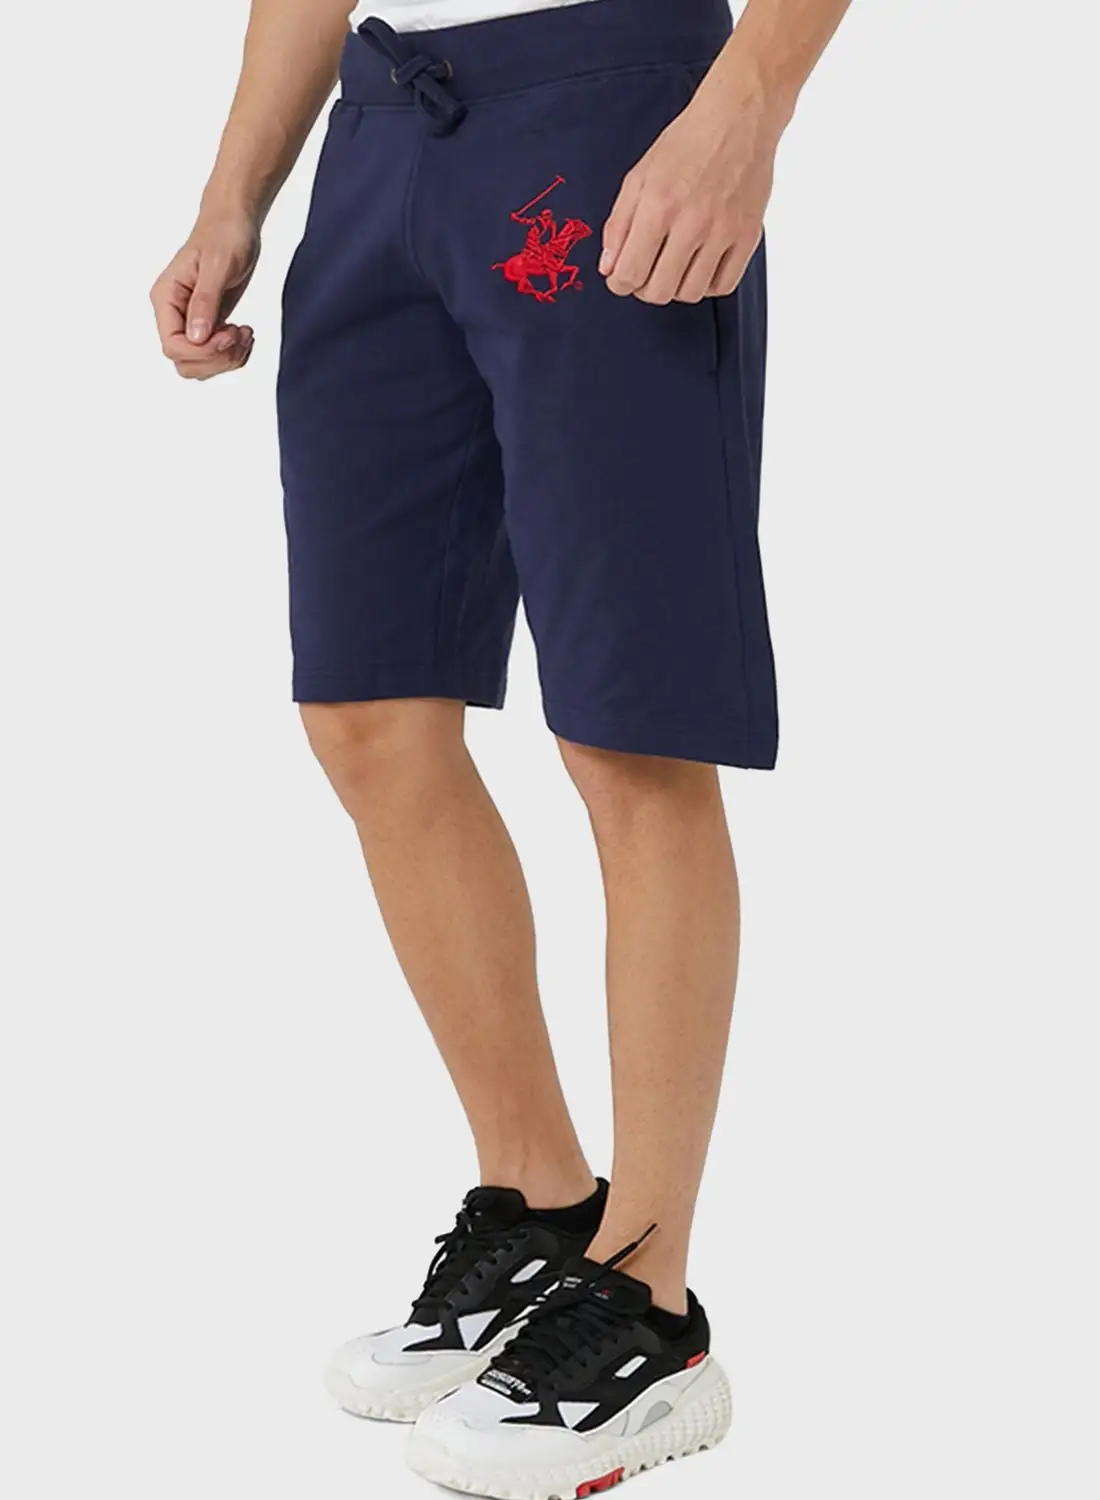 bhpoloclub Embroidered Logo Shorts